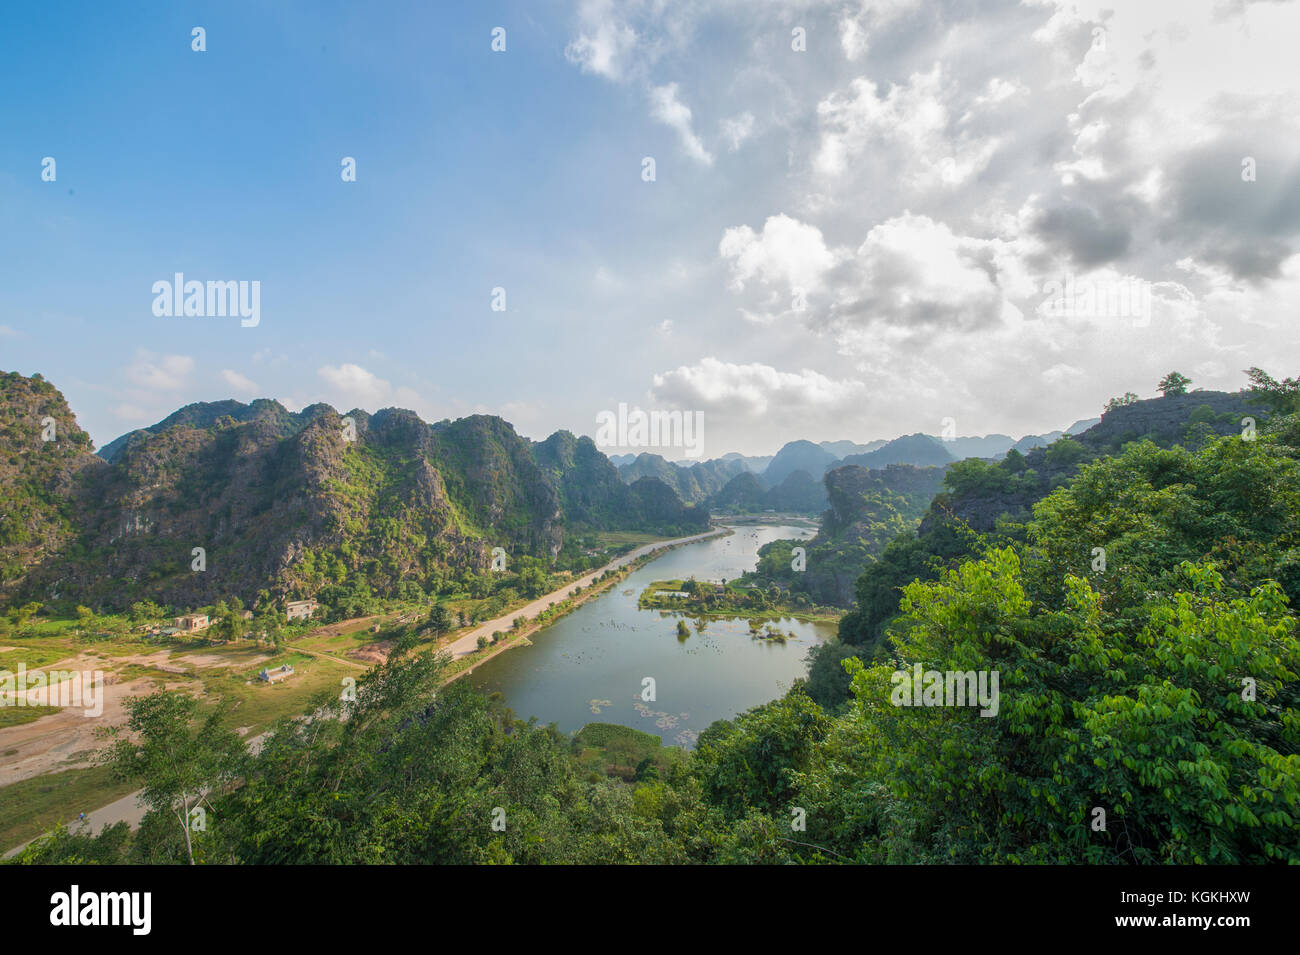 Top view of the Ngo Dong River at the Tam Coc portion, Ninh Binh Province, Vietnam. Landscape formed by limestone mountains and rice fields. The Tam C Stock Photo